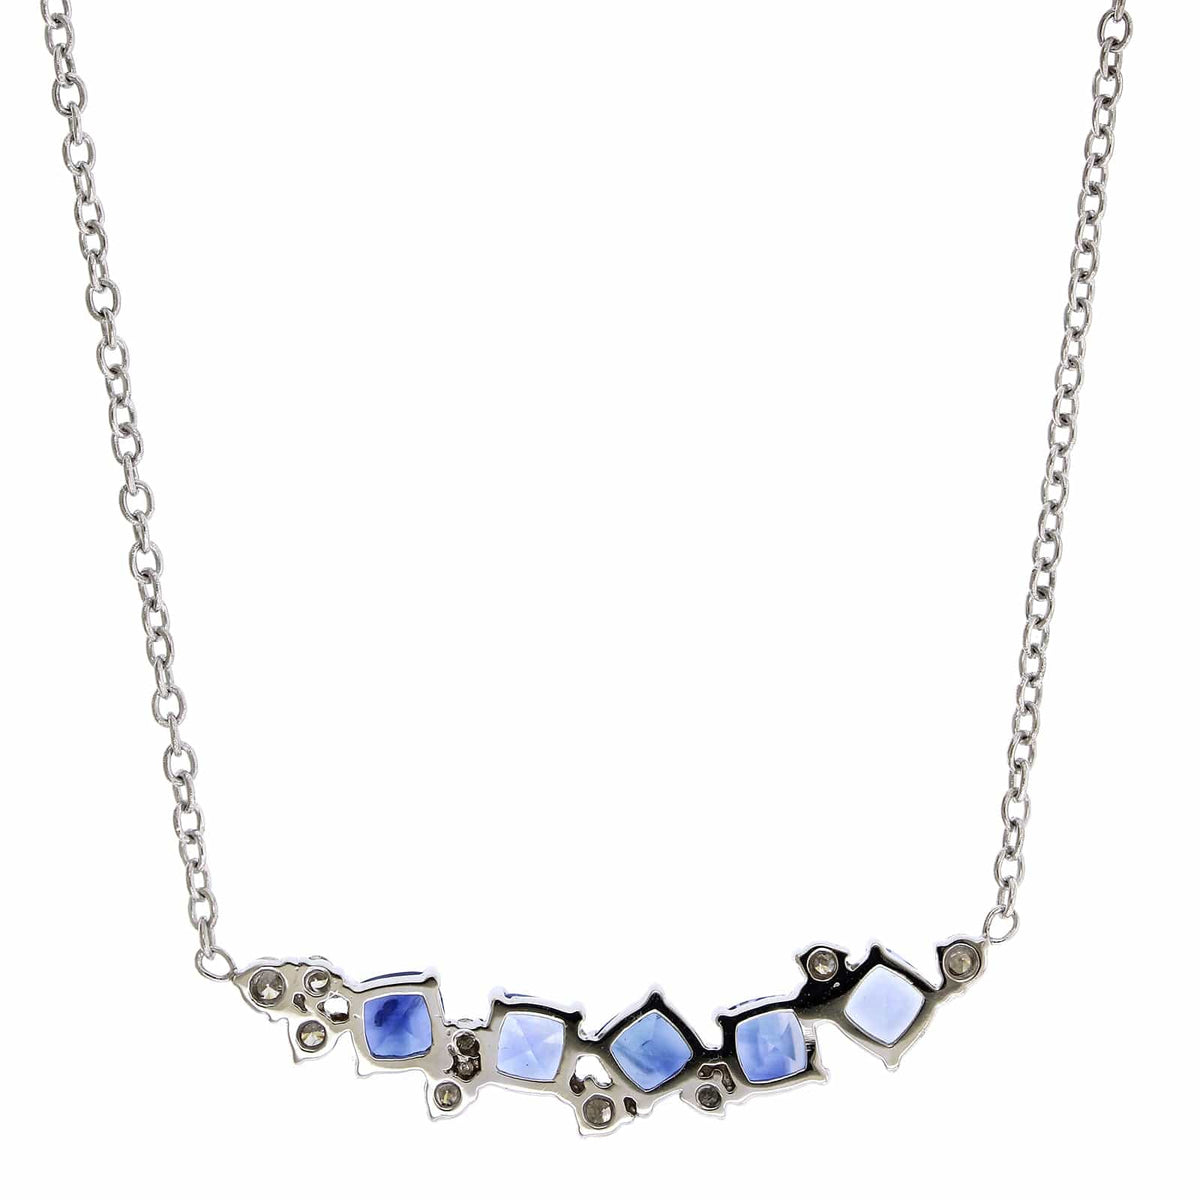 Penny Preville 18K White Gold Ombre Sapphire Necklace